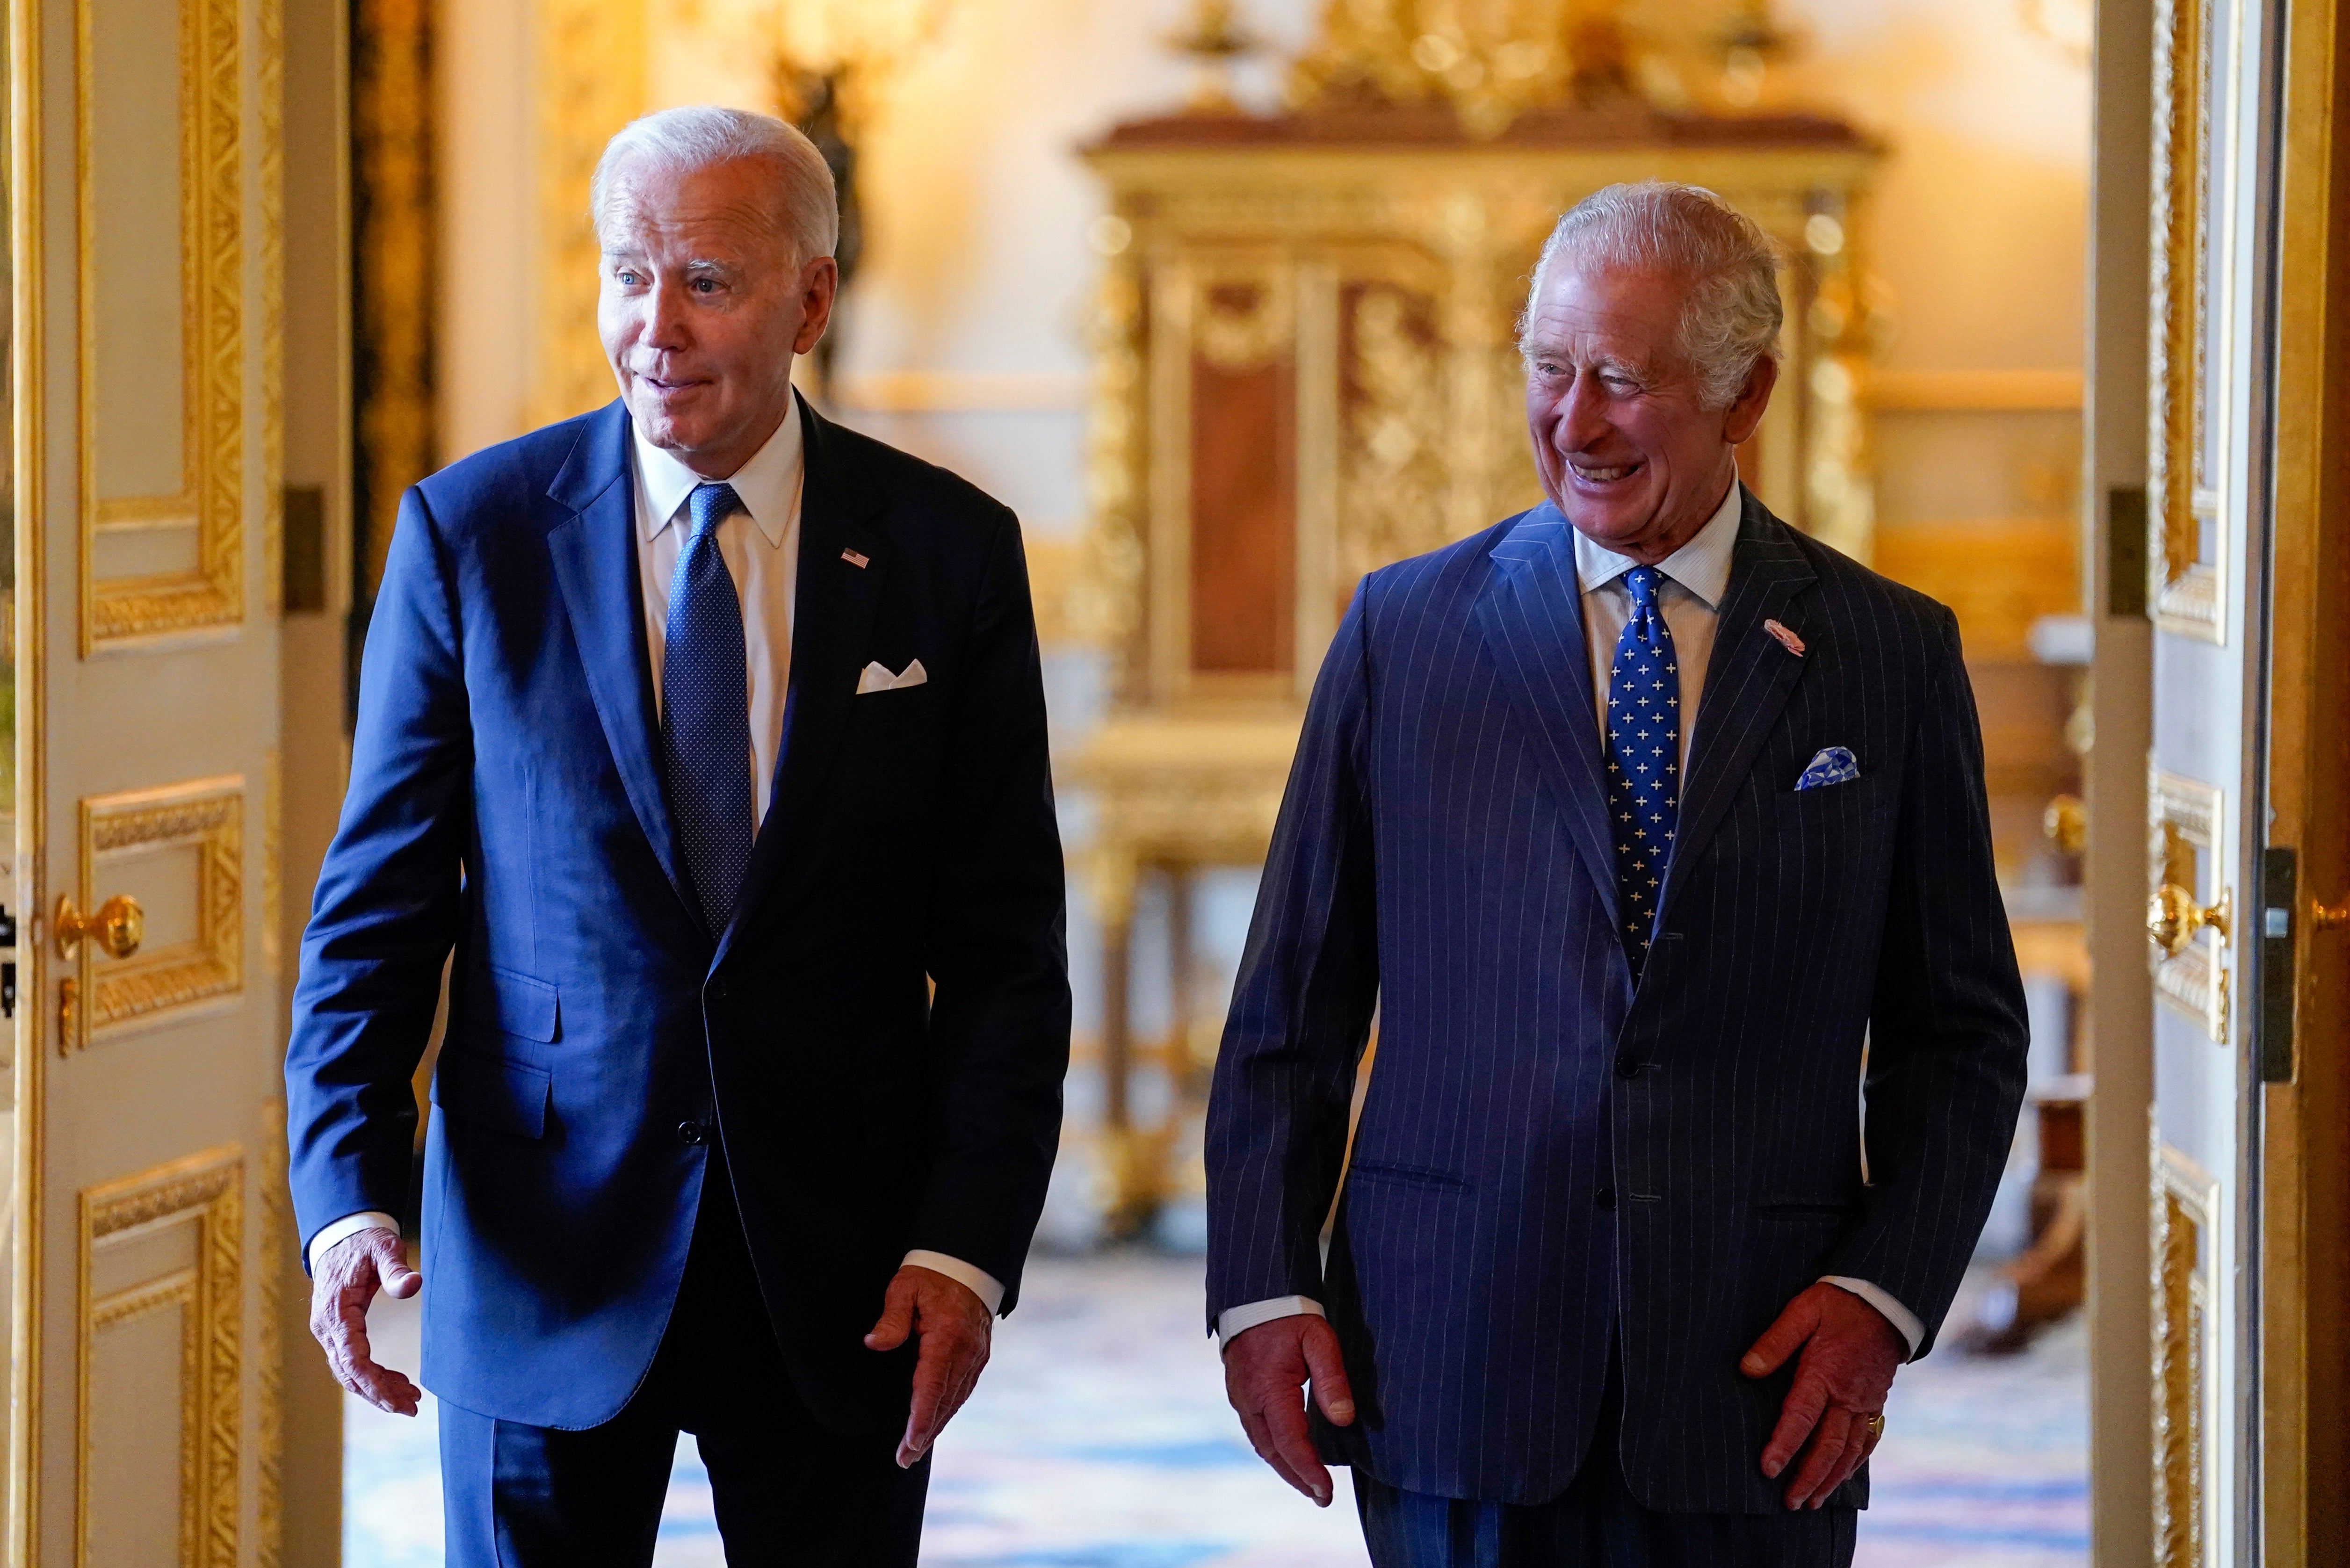 King Charles III, right, and Joe Biden arrive to meet participants of the Climate Finance Mobilisation forum in the Green Drawing Room at Windsor Castle, England, in July 2023